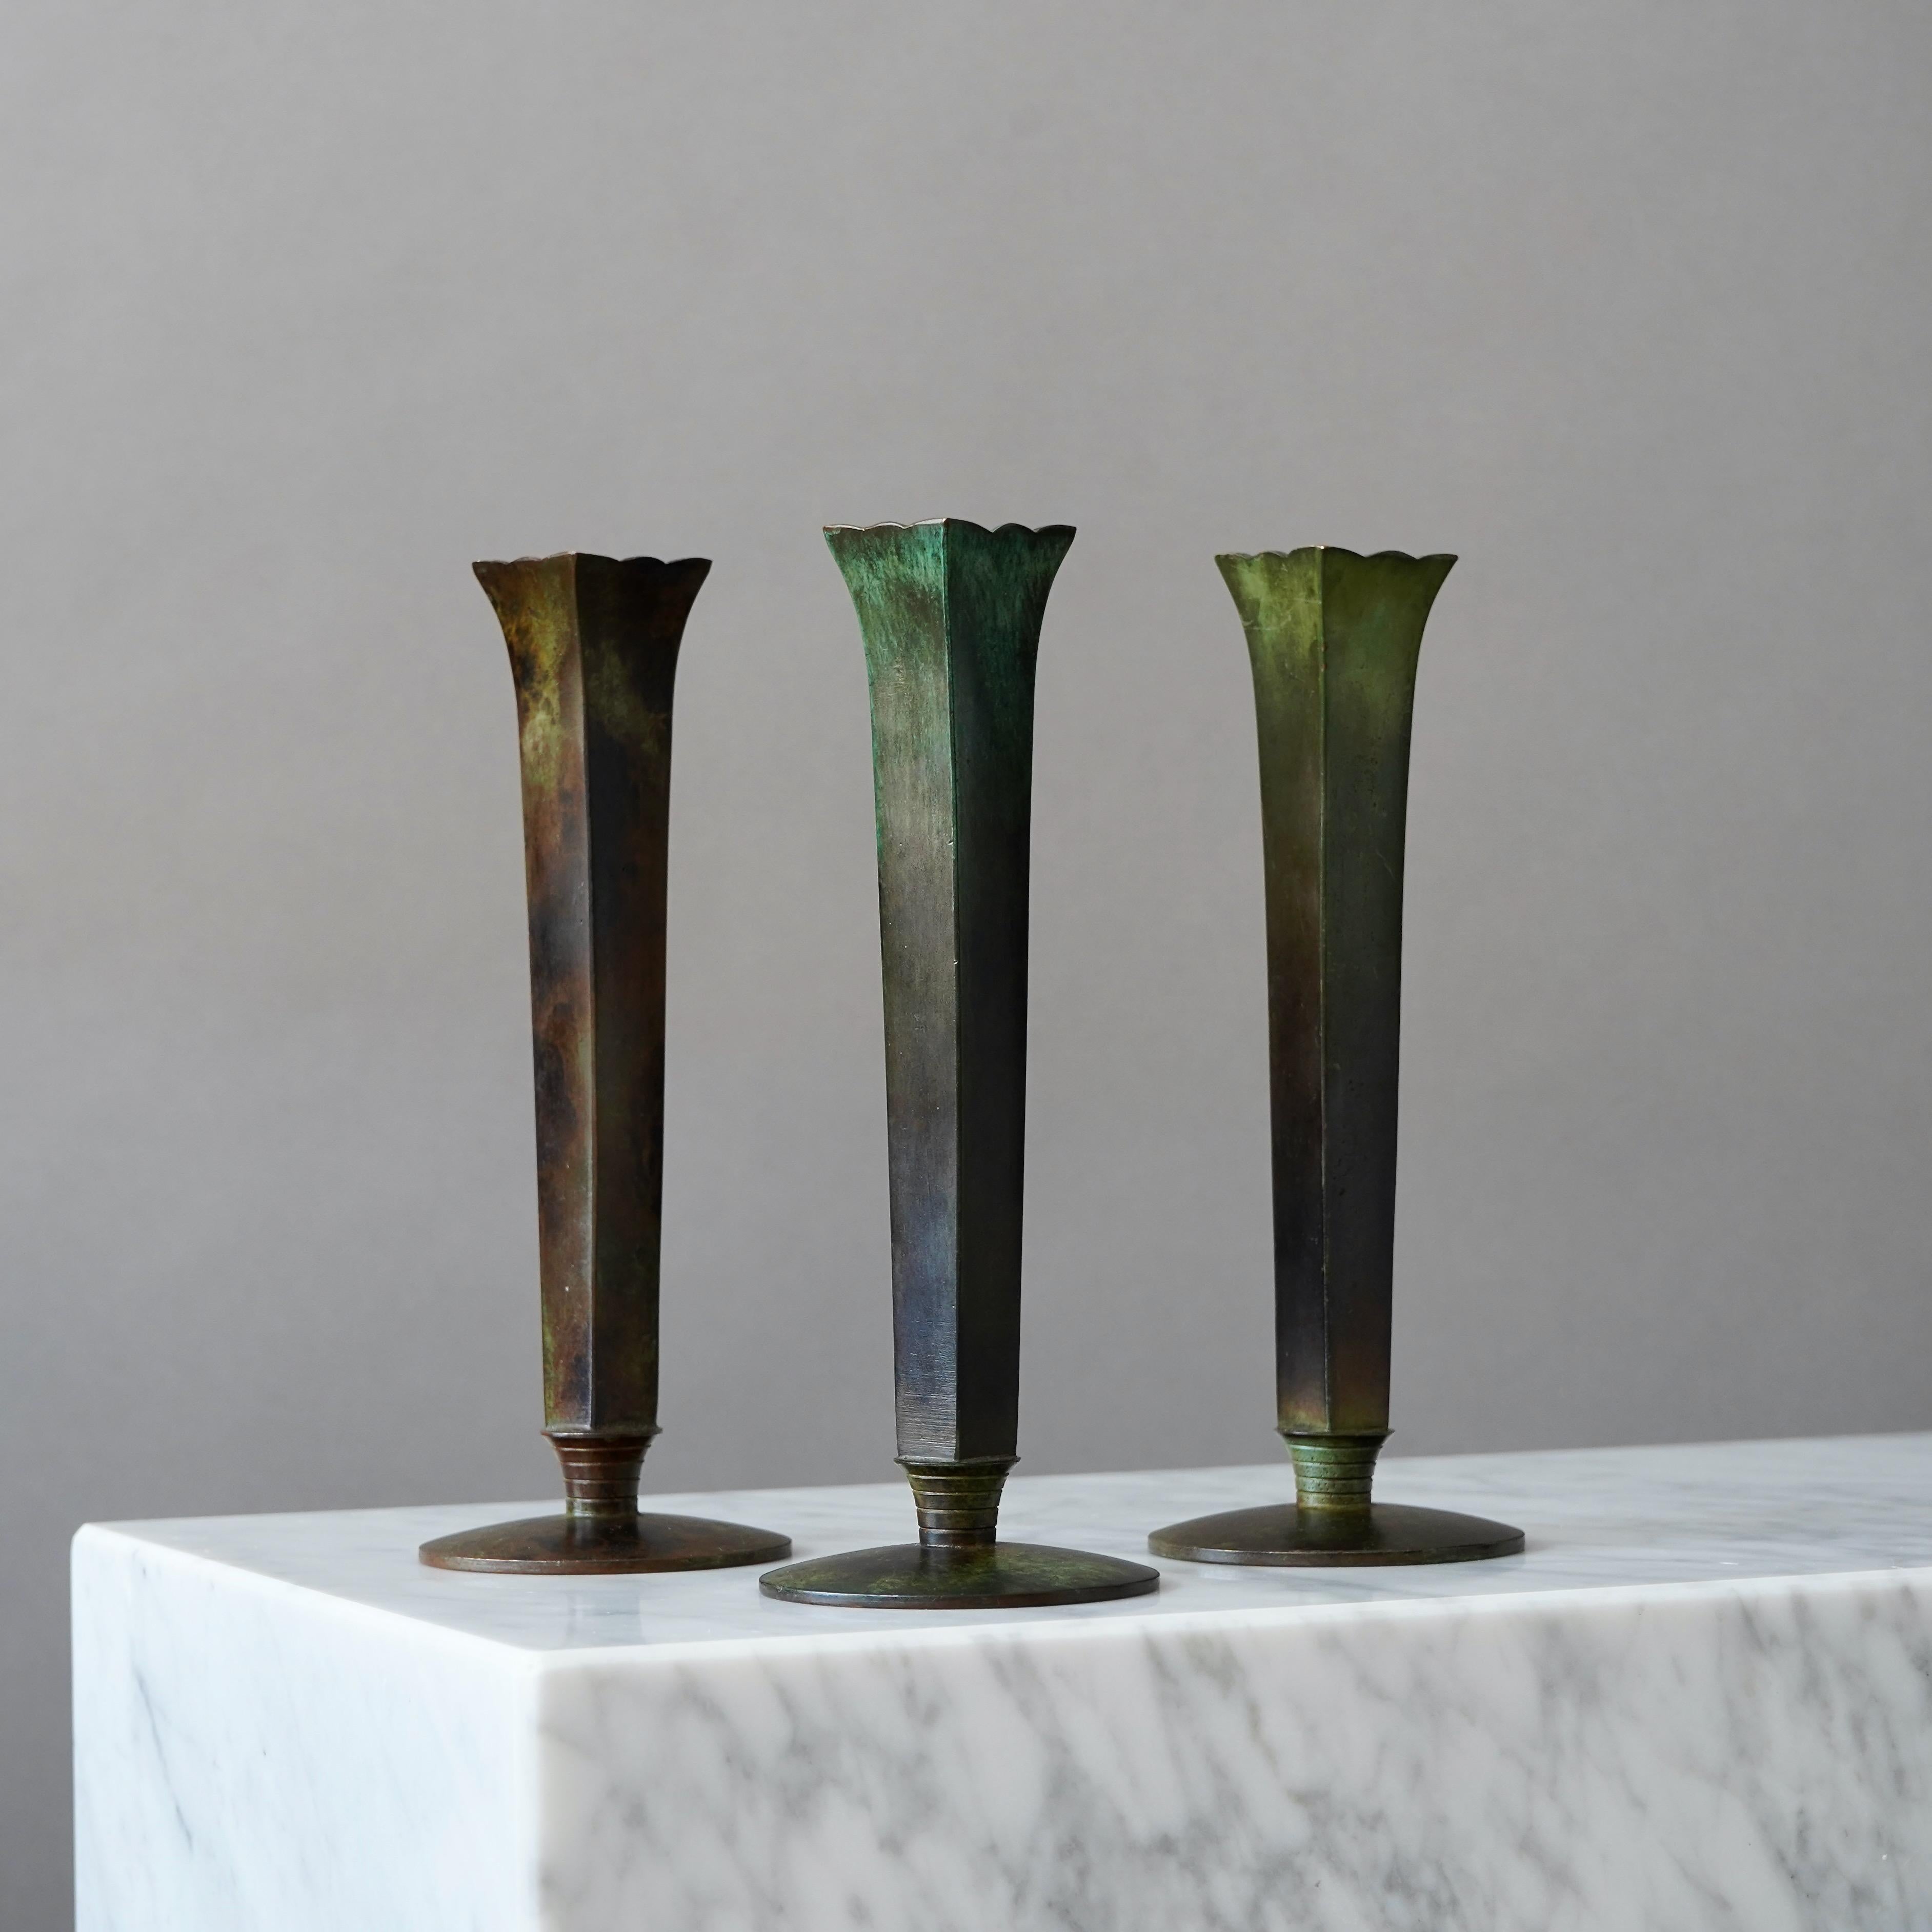 A set of 3 beautiful bronze vases with amazing patina. 
Made by GAB Guldsmedsaktiebolaget, Sweden, 1930s.  

Great condition, with a few light scratches.
Stamped 'BRONS' and makers mark.